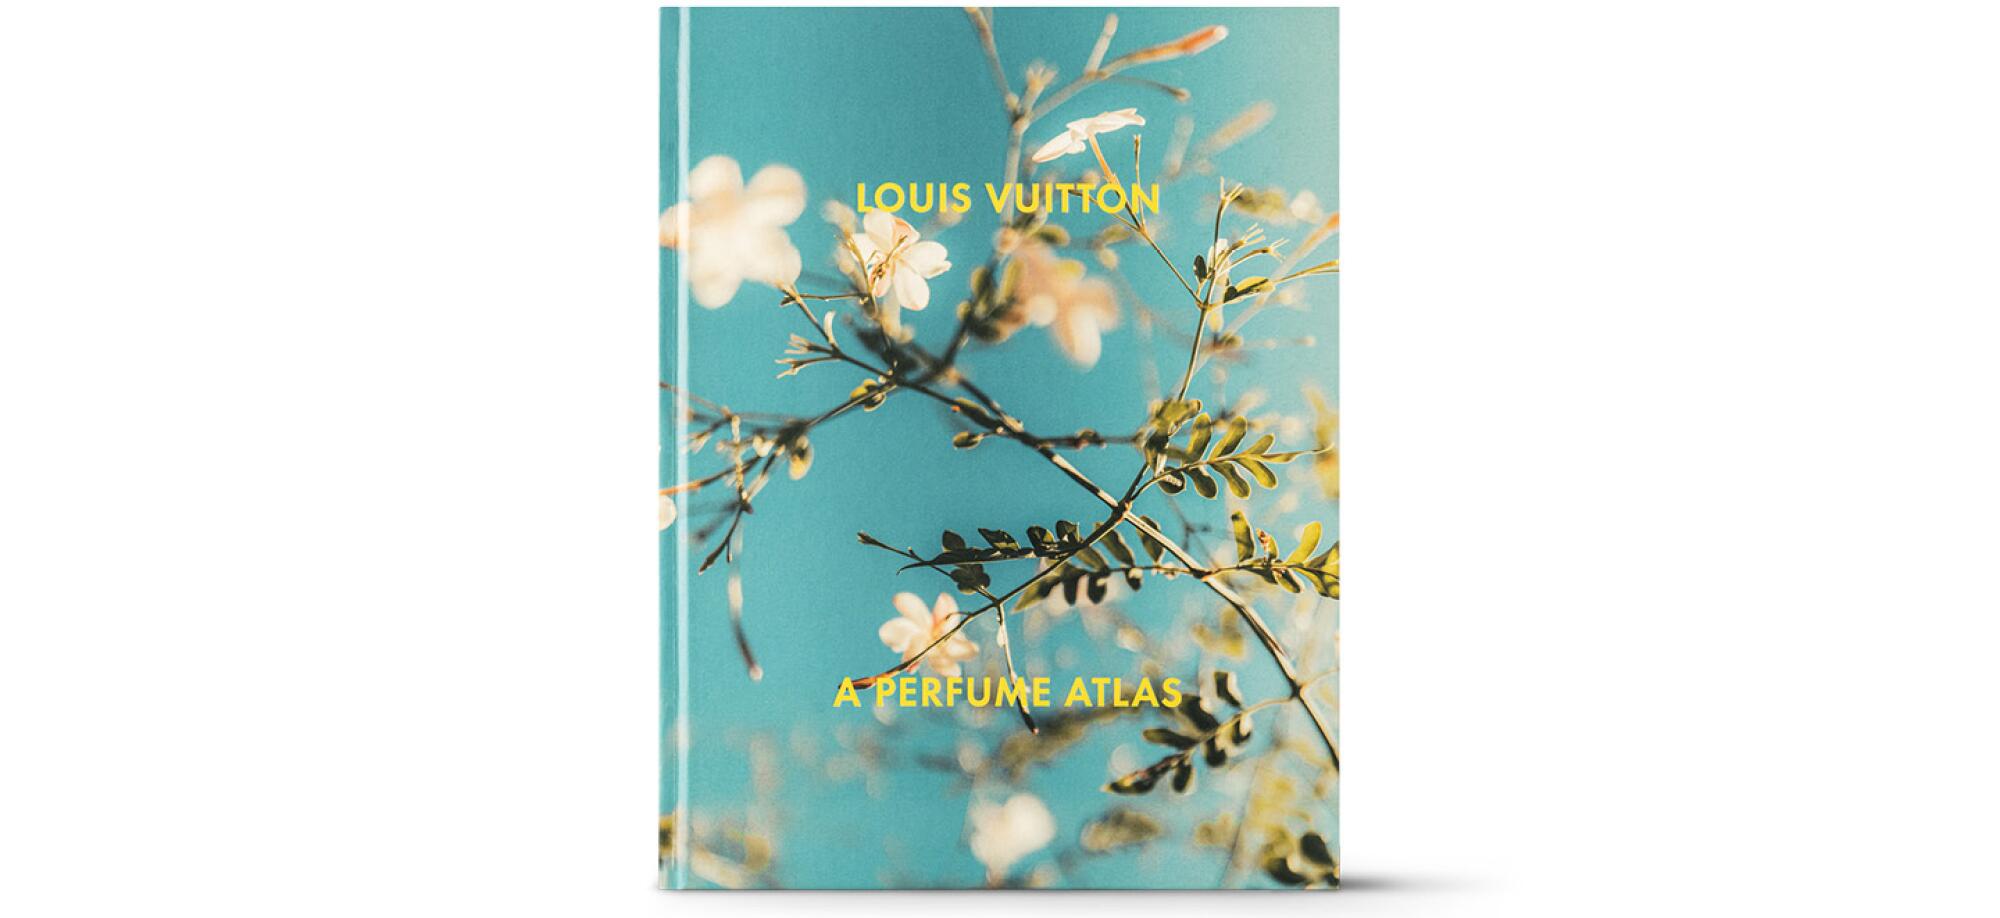 The cover of a Louis Vuitton book.